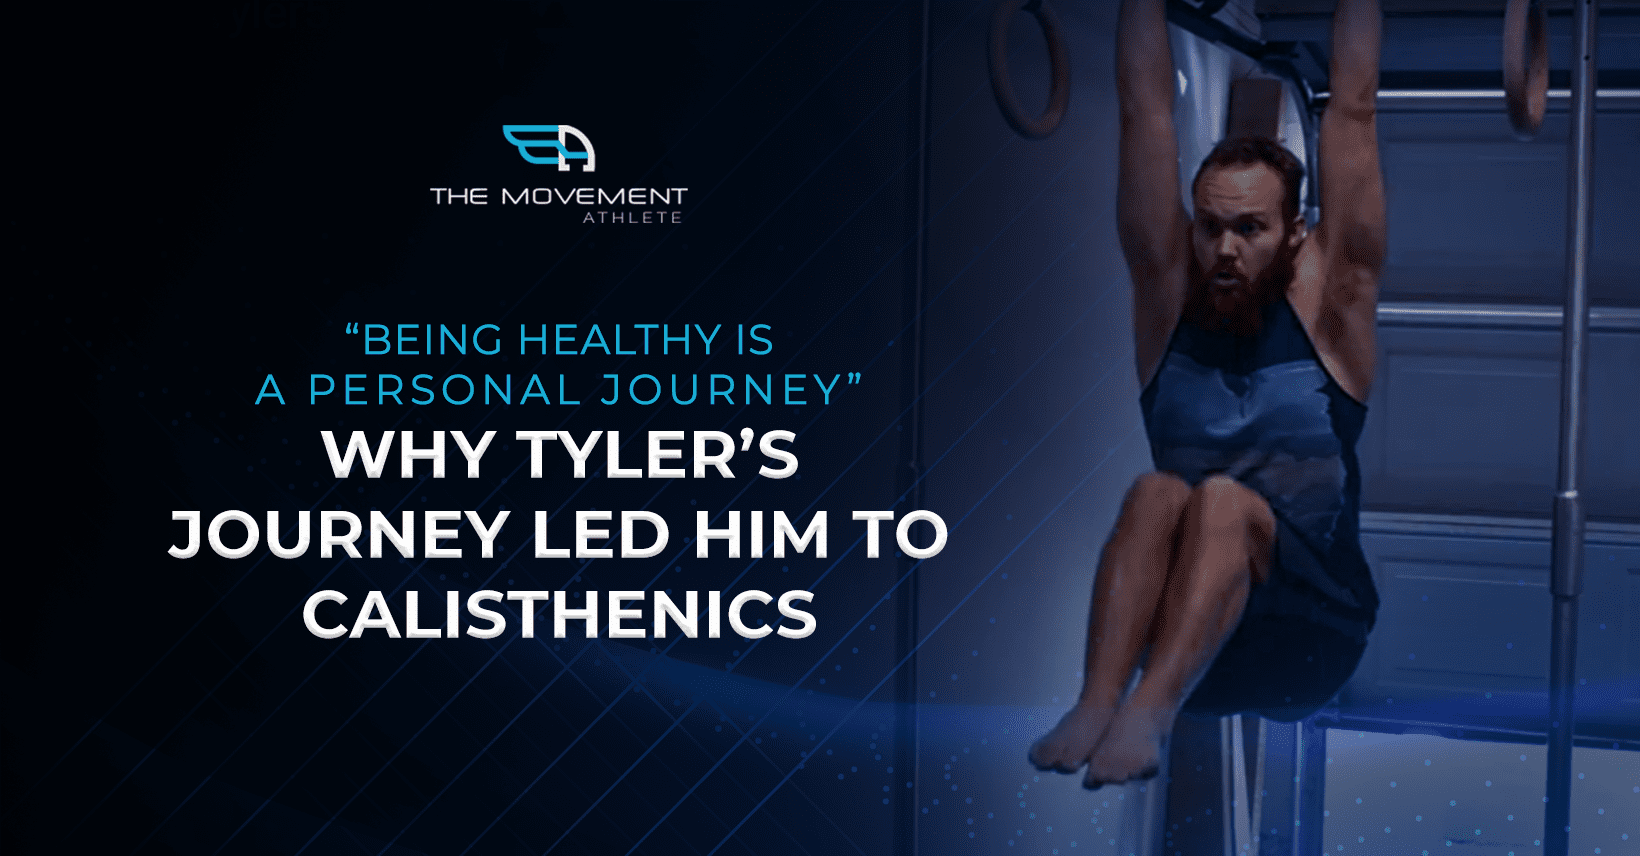 Being_healthy_is_a_personal_journey_Why_Tyler_journey_led_him_to_calisthenics